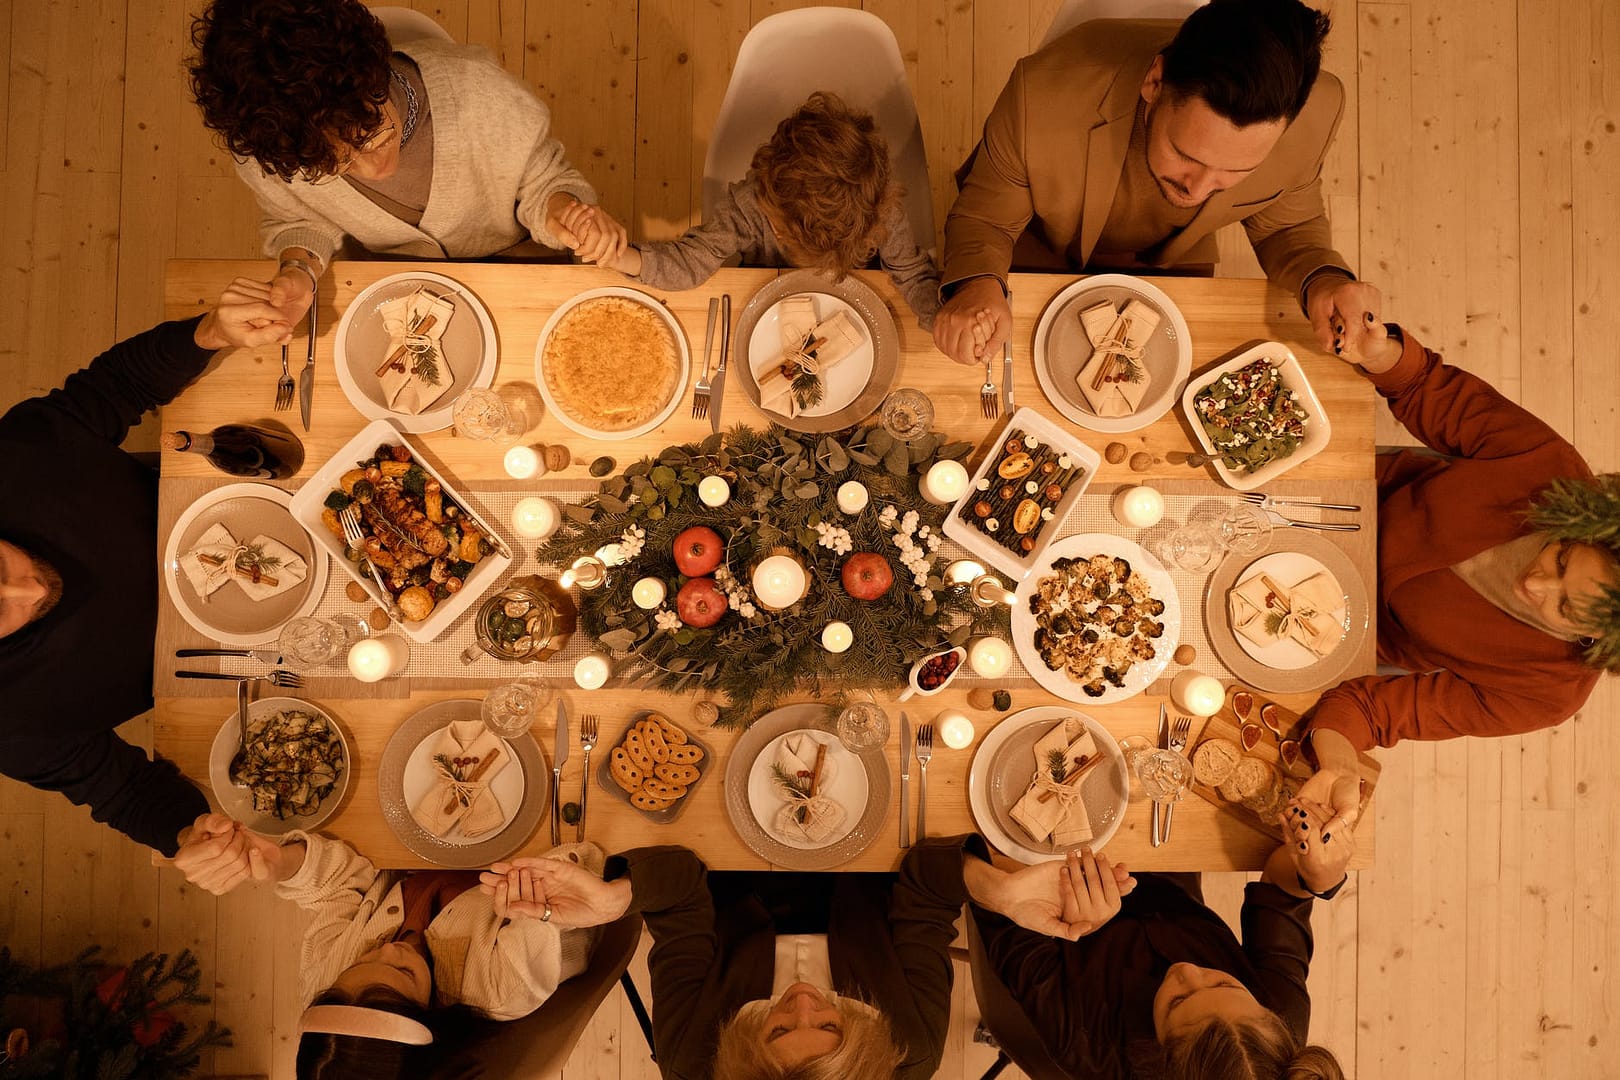 10 Strategies for Navigating Holiday Family Gatherings